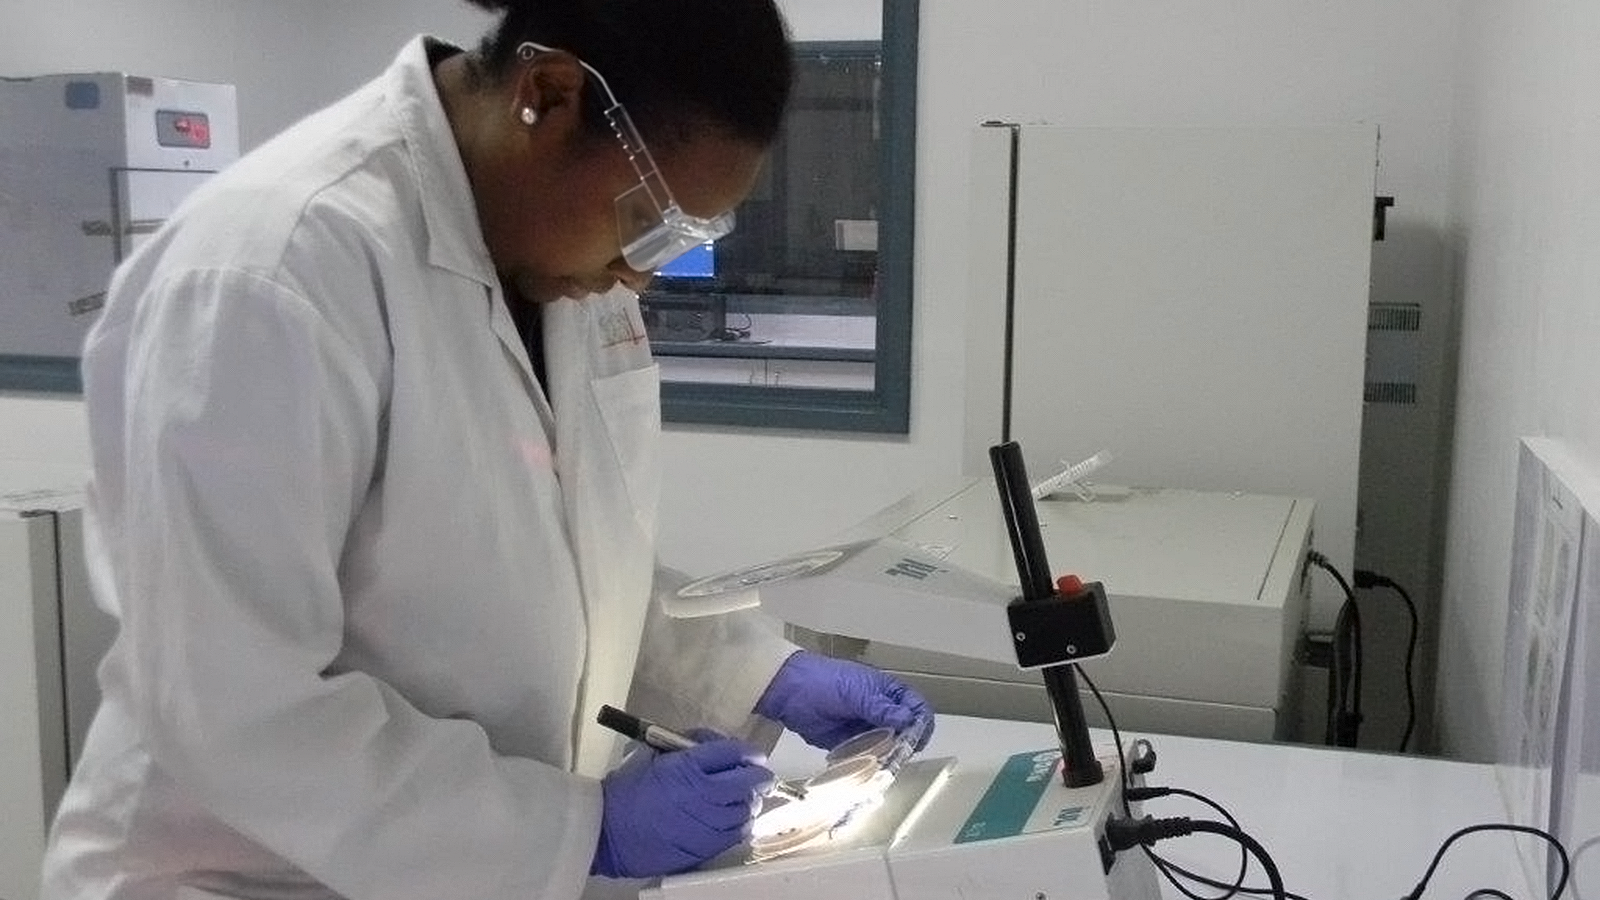 Scientist Analyzing Sample in Laboratory 